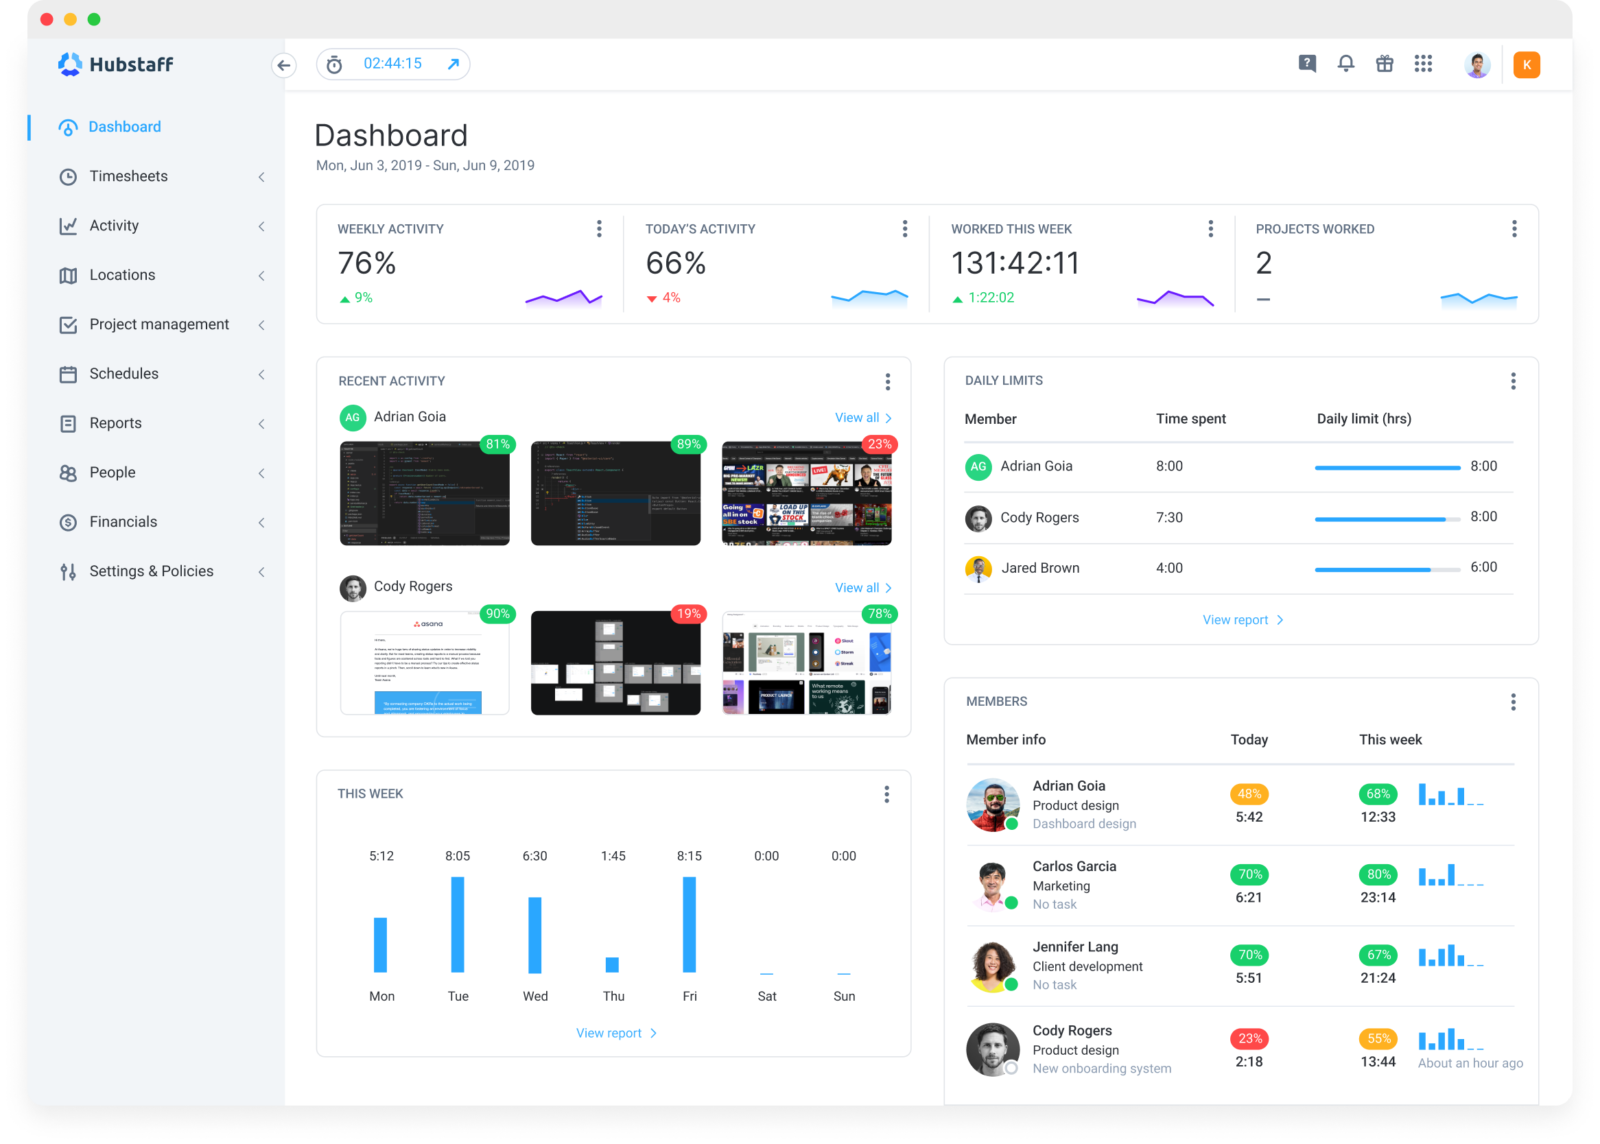 Hubstaff dashboard. Hubstaff offers time tracking, productivity monitoring, and employee activity tracking.